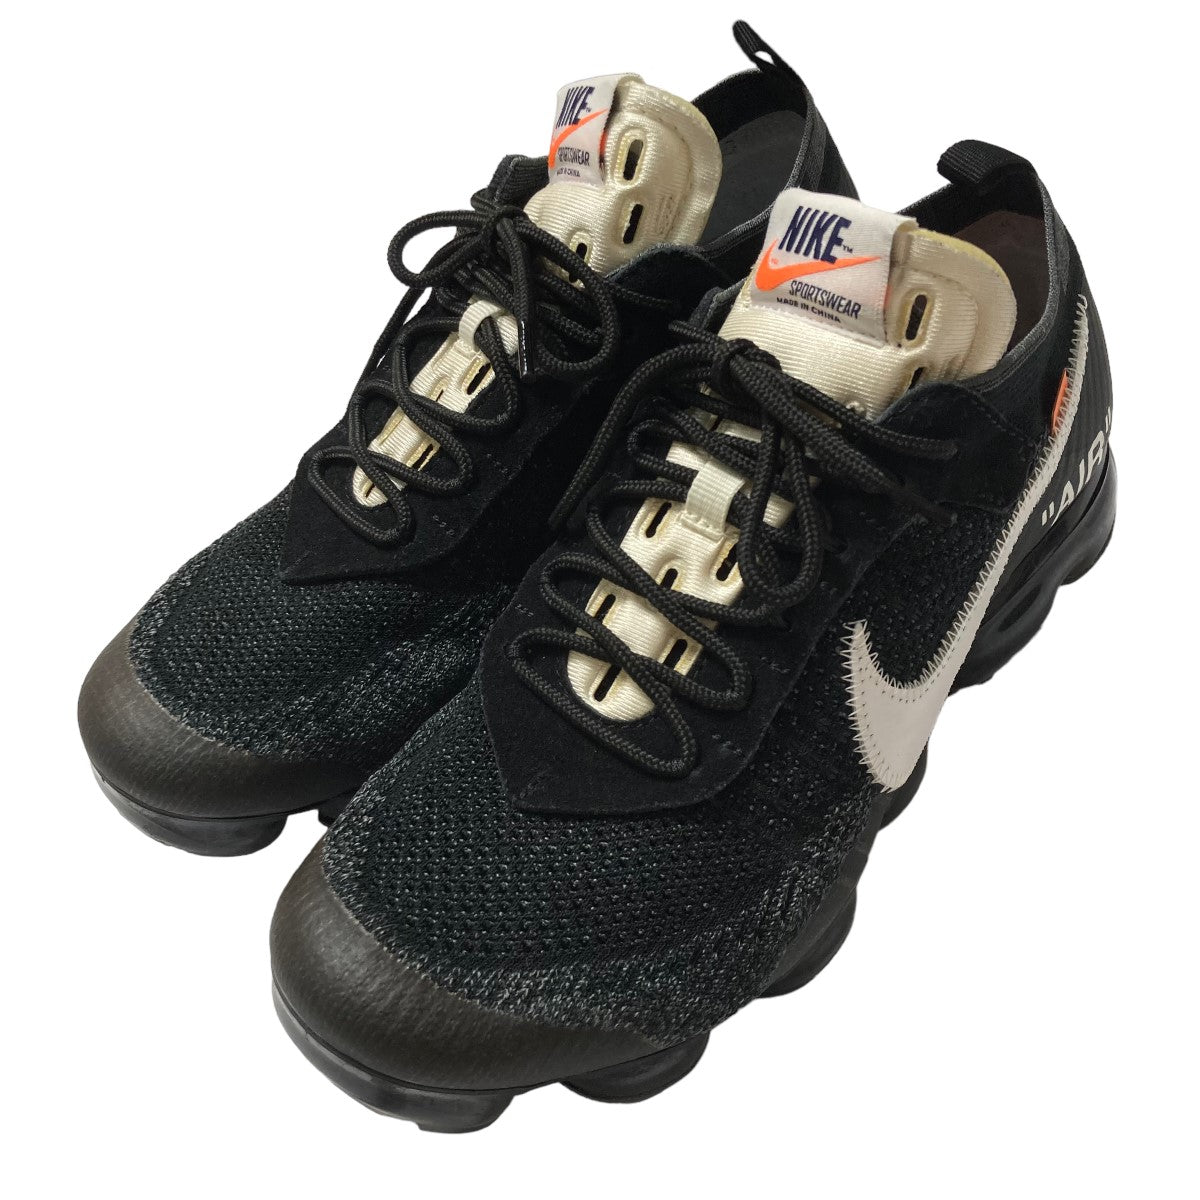 M69その他の出品物はコチラNIKE×OFF-WHITE THE 10:NIKE AIR VAPORMAX